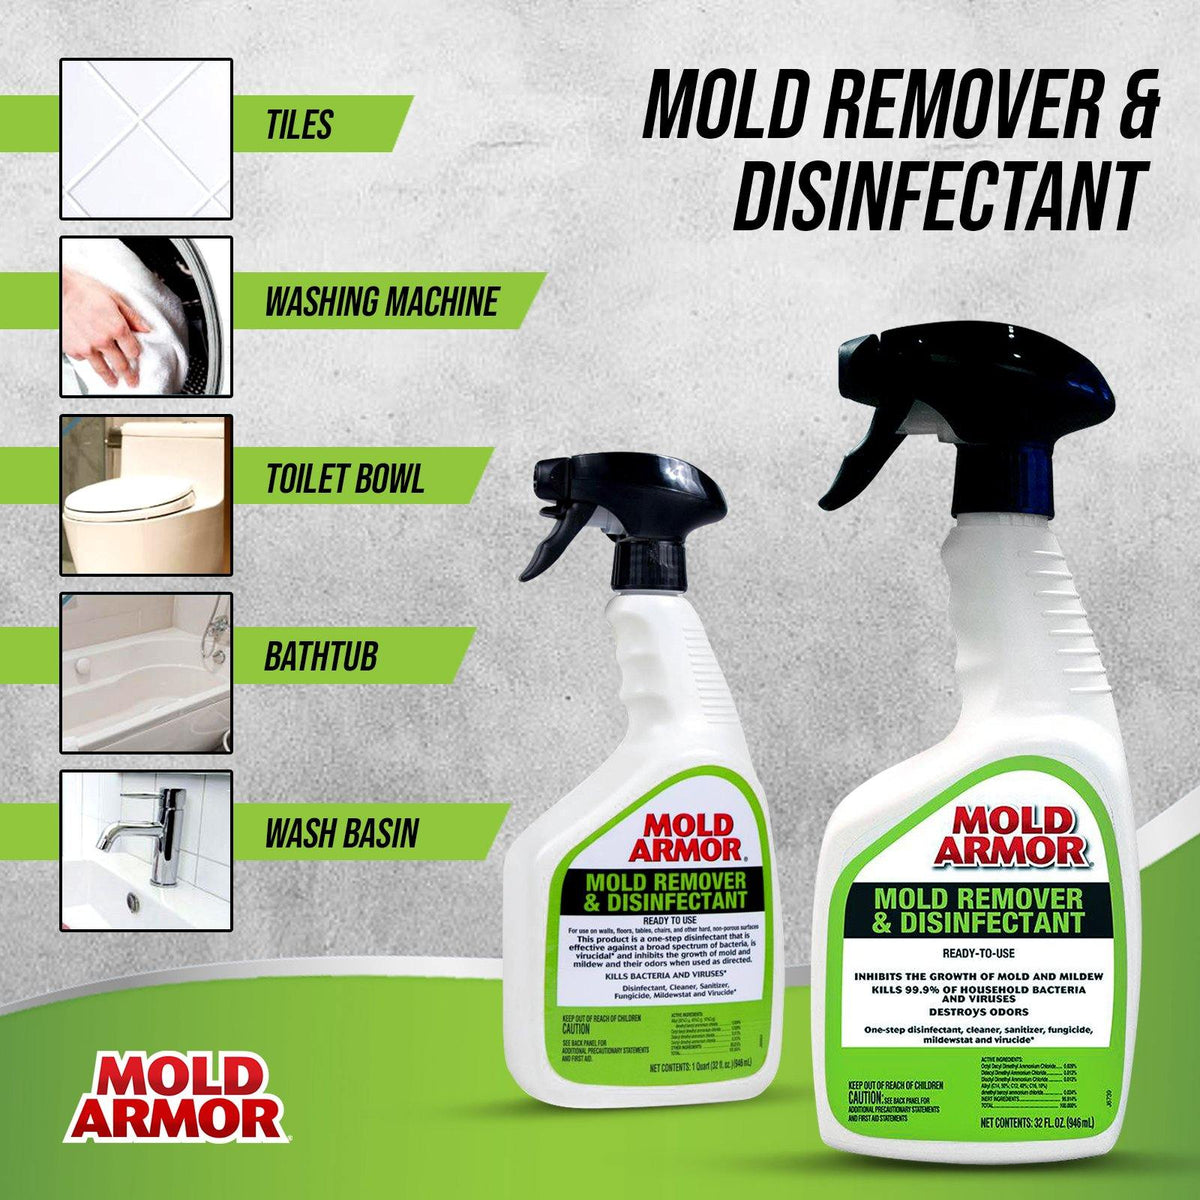 Rust-Oleum 60601A Jomax Virus & Mold Killer Concentrate Disinfectant &  Deodorizer Gallon: Household Disinfectants (020066219499-2)